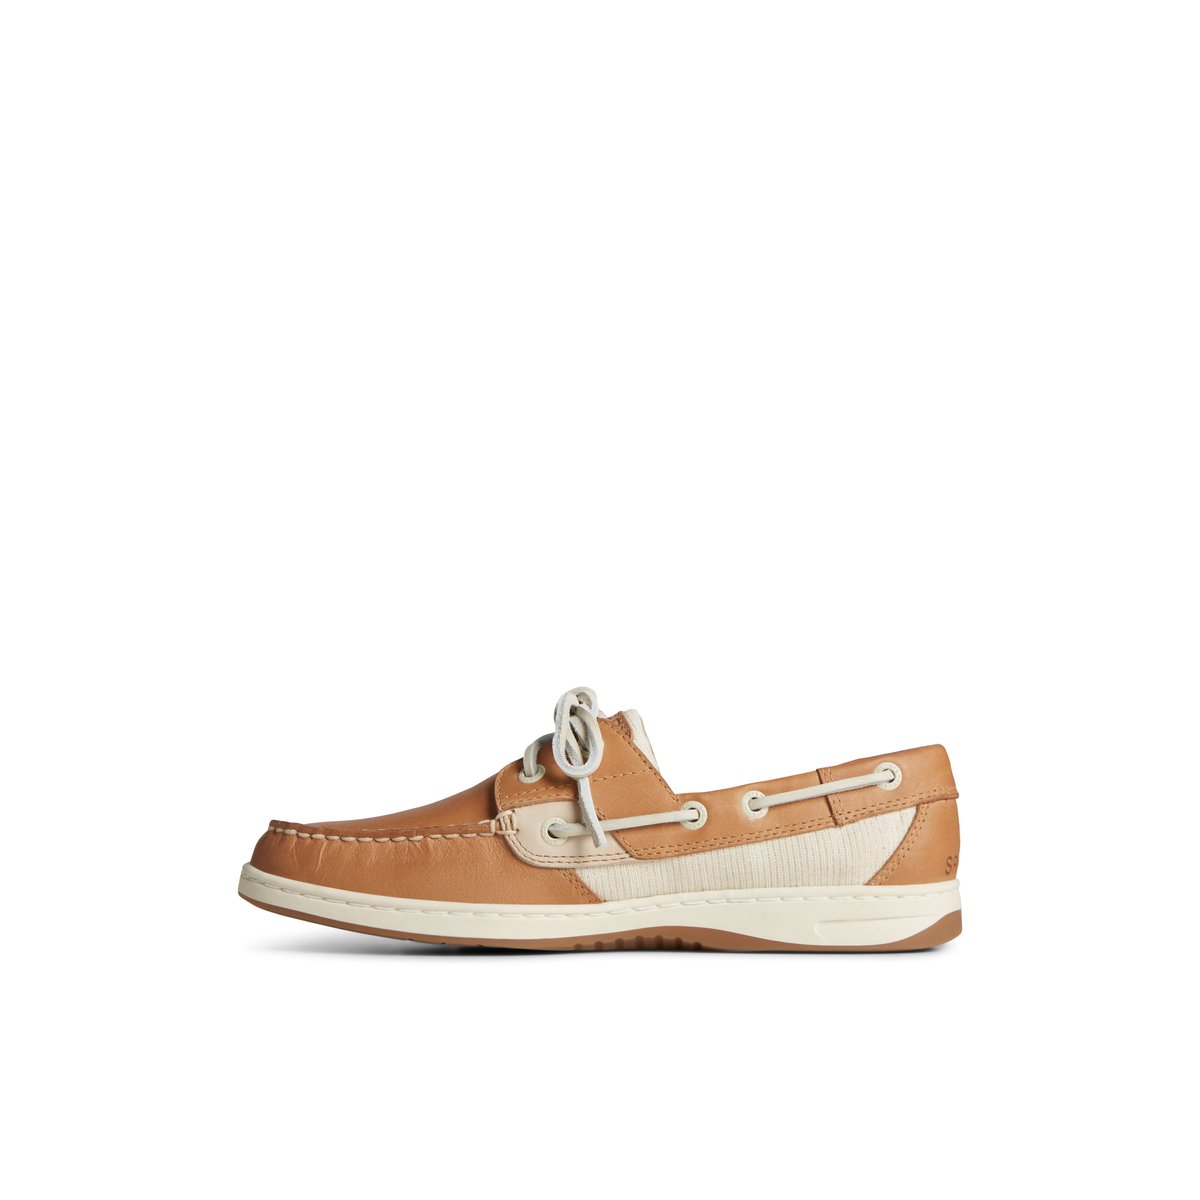 Bluefish Metallic Boat Shoe Natural Women's Boat Shoes | Sperry US